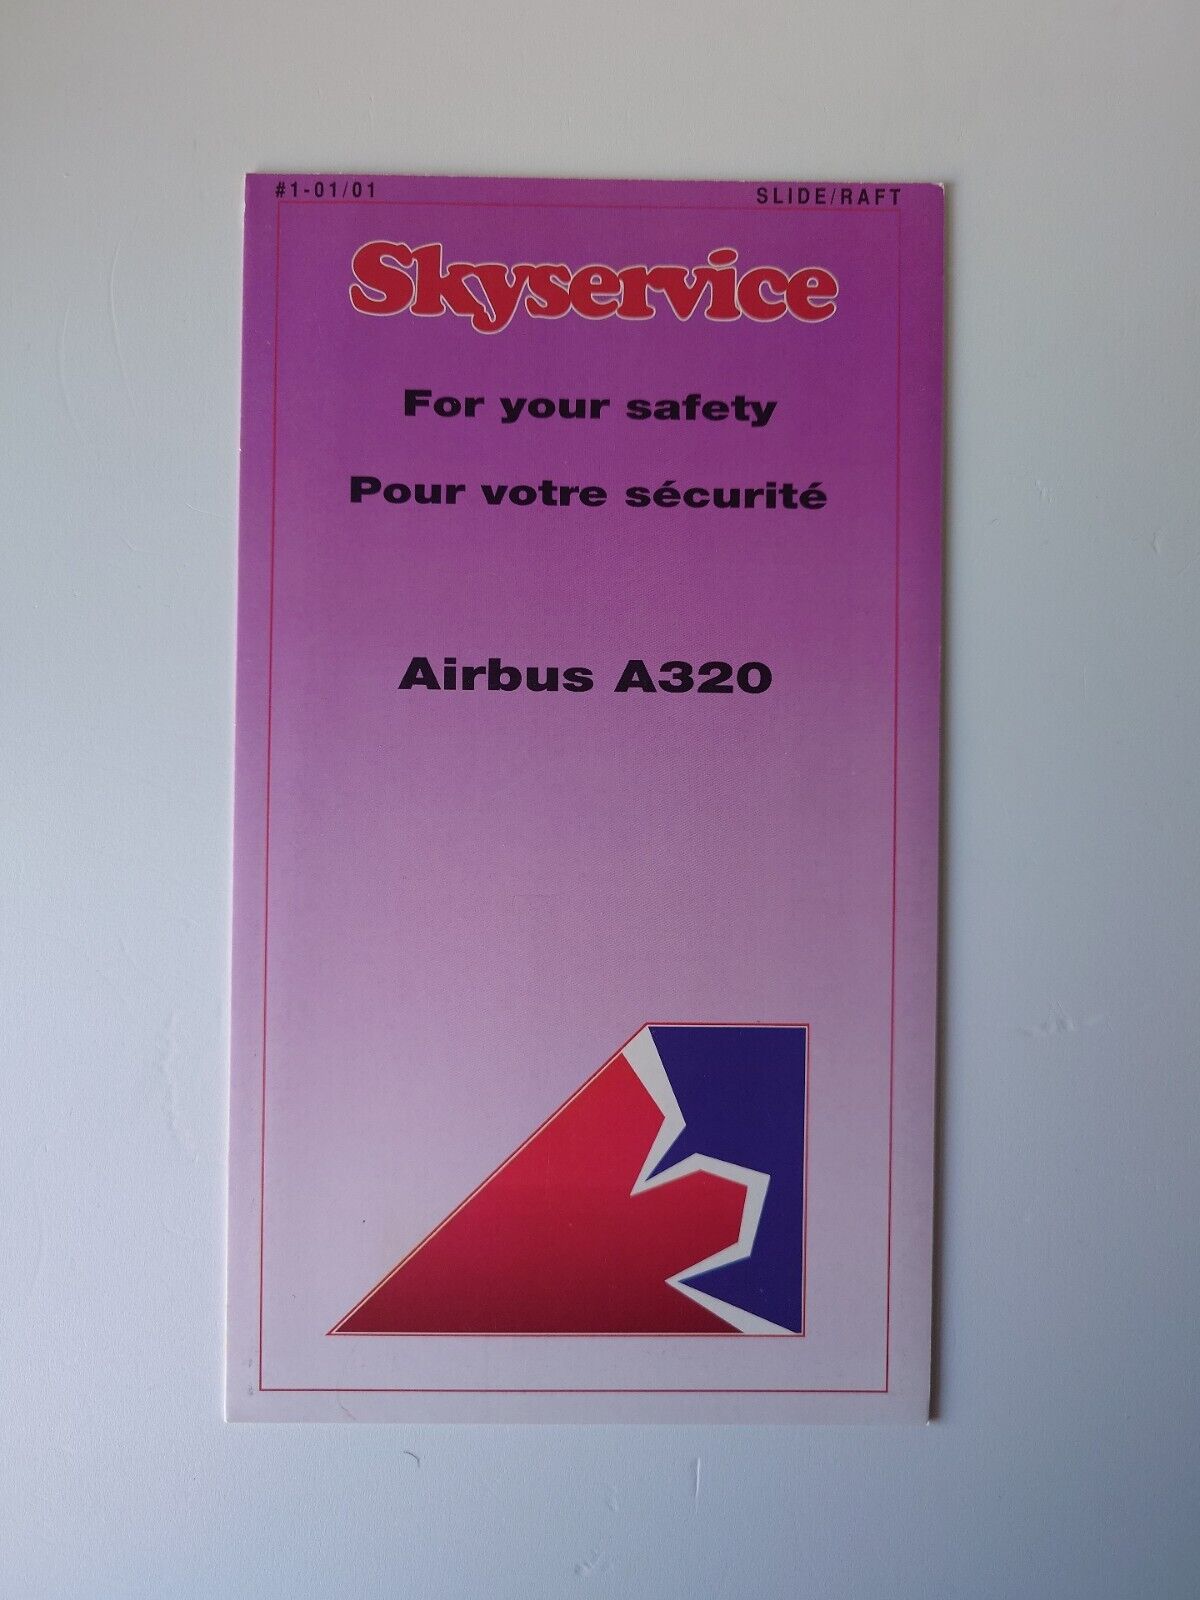 Sky service Airbus A320 Slide/Raft 1-01/01 Safety Card